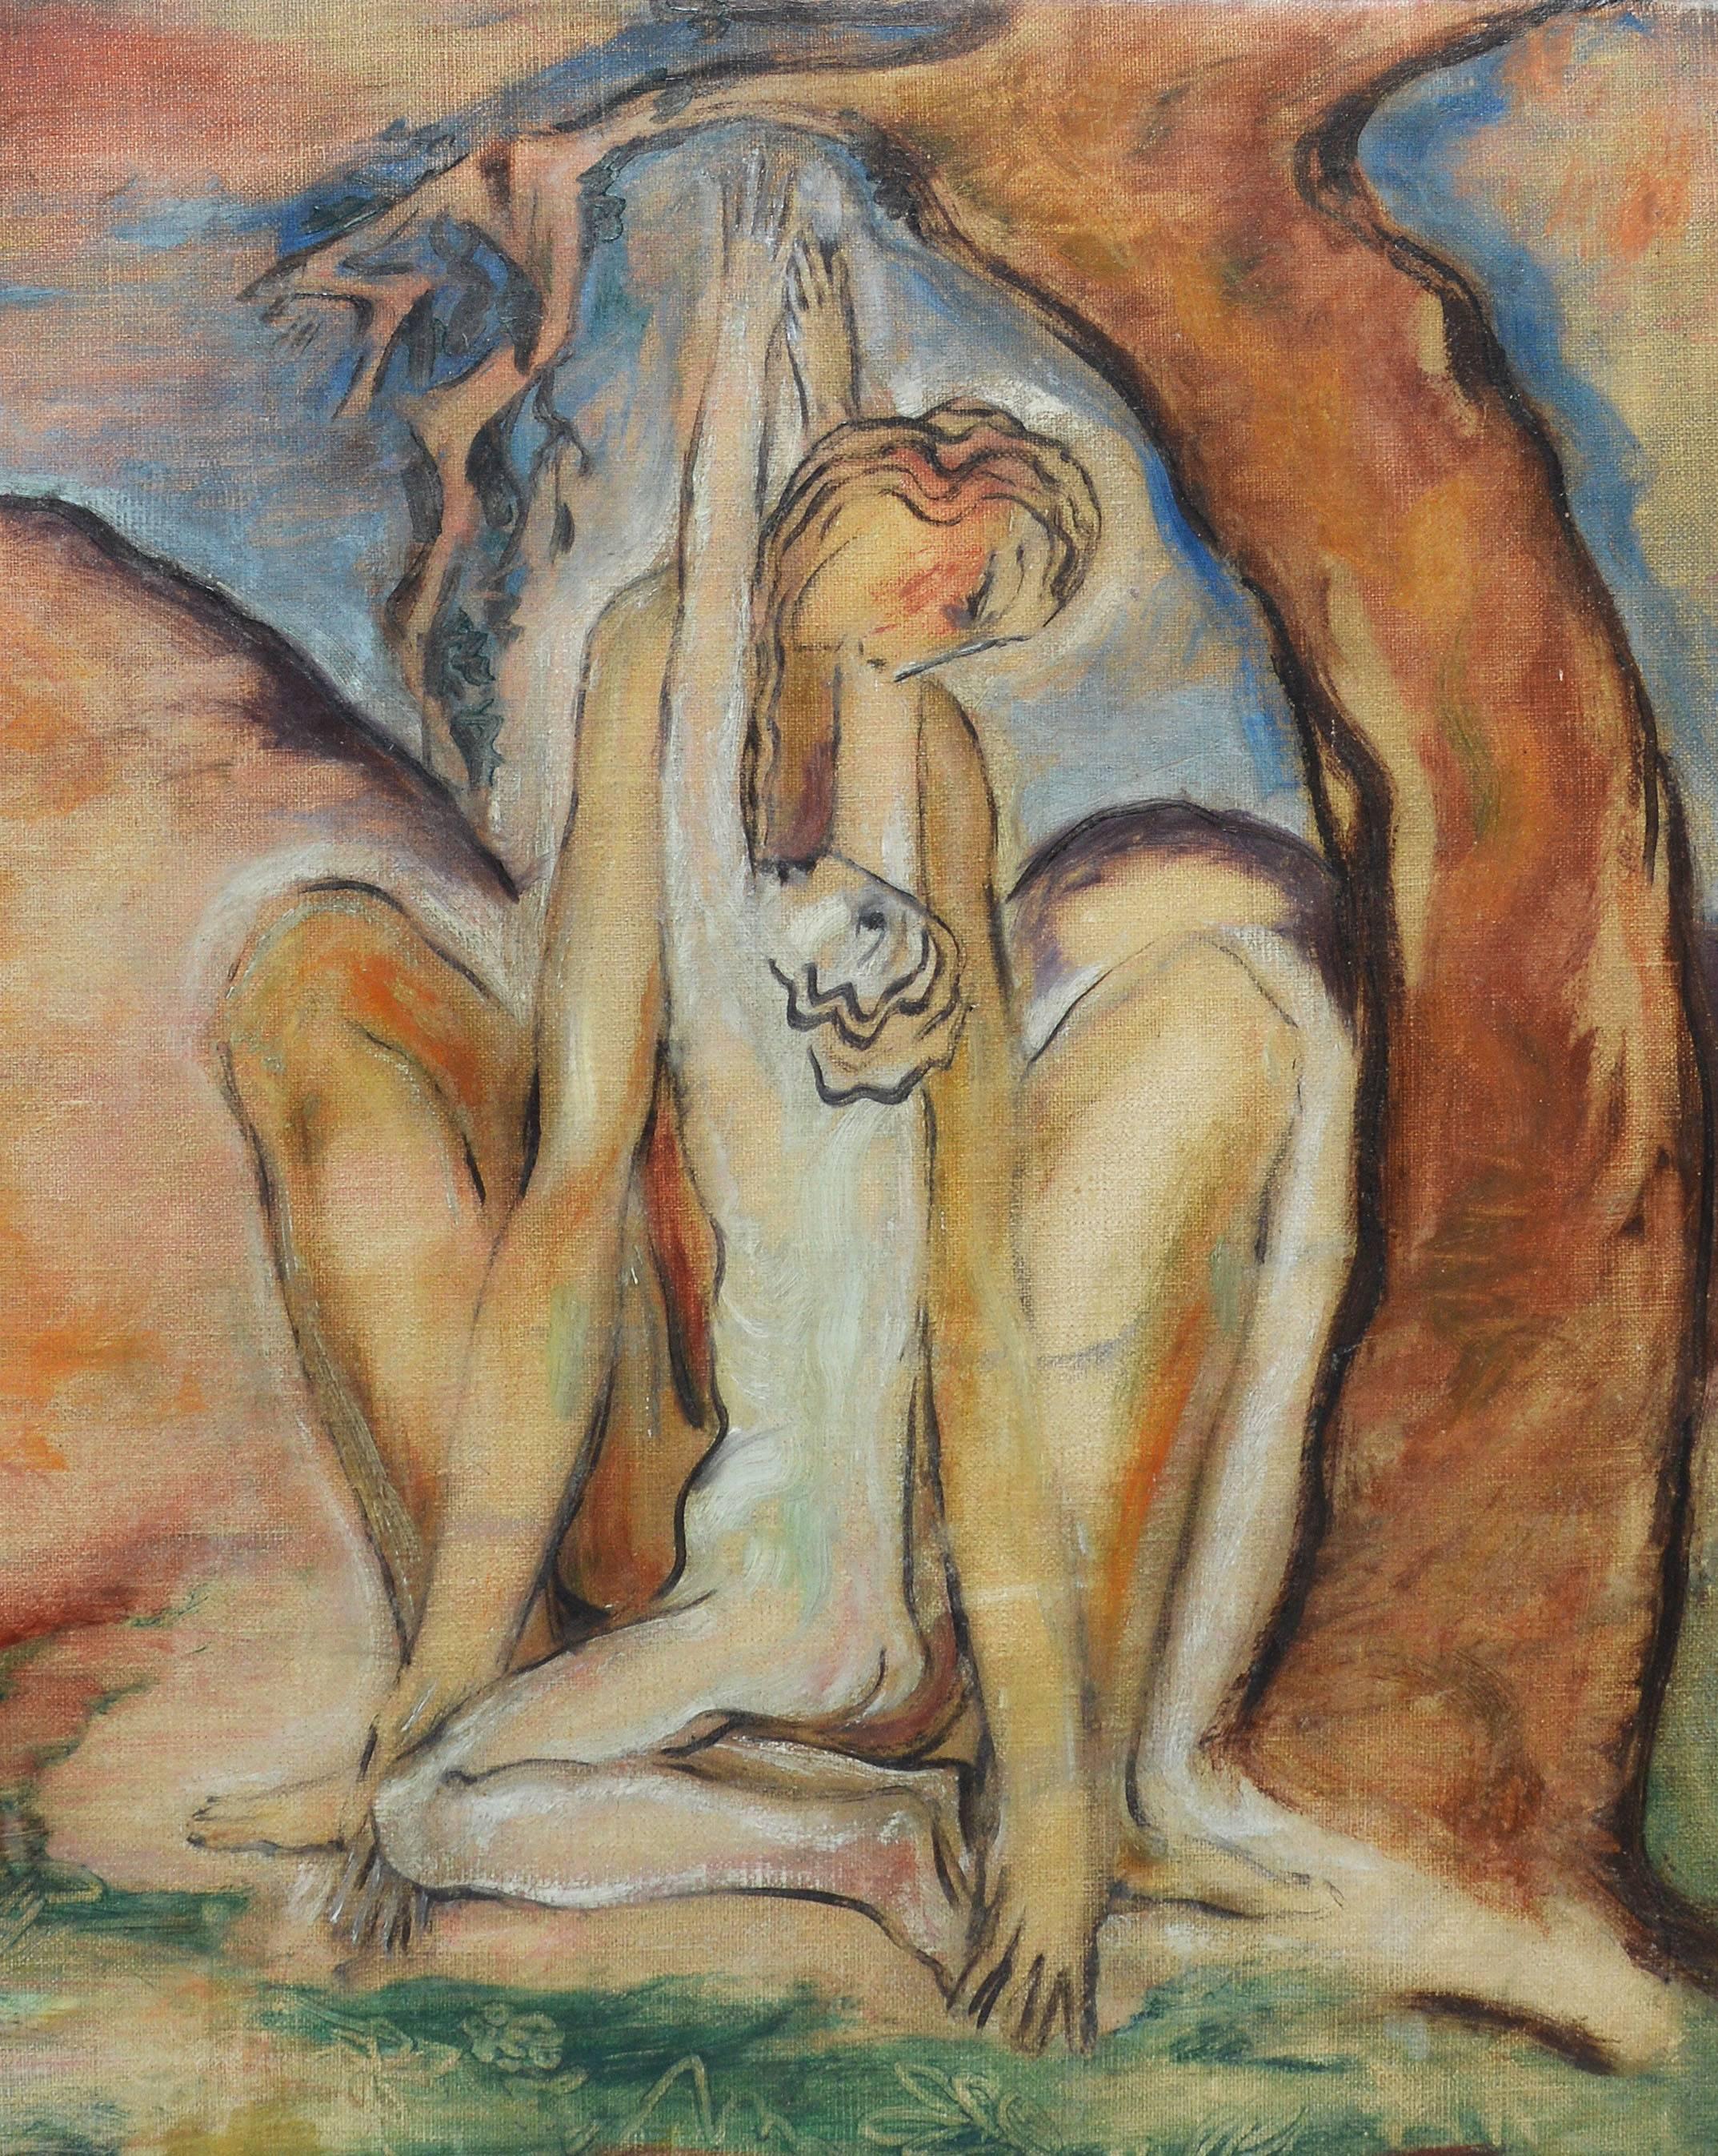 Modernist composition with two figures embracing.  Oil on canvas, circa 1920.  Unsigned.  Displayed in a period modernist frame.  Image size, 17